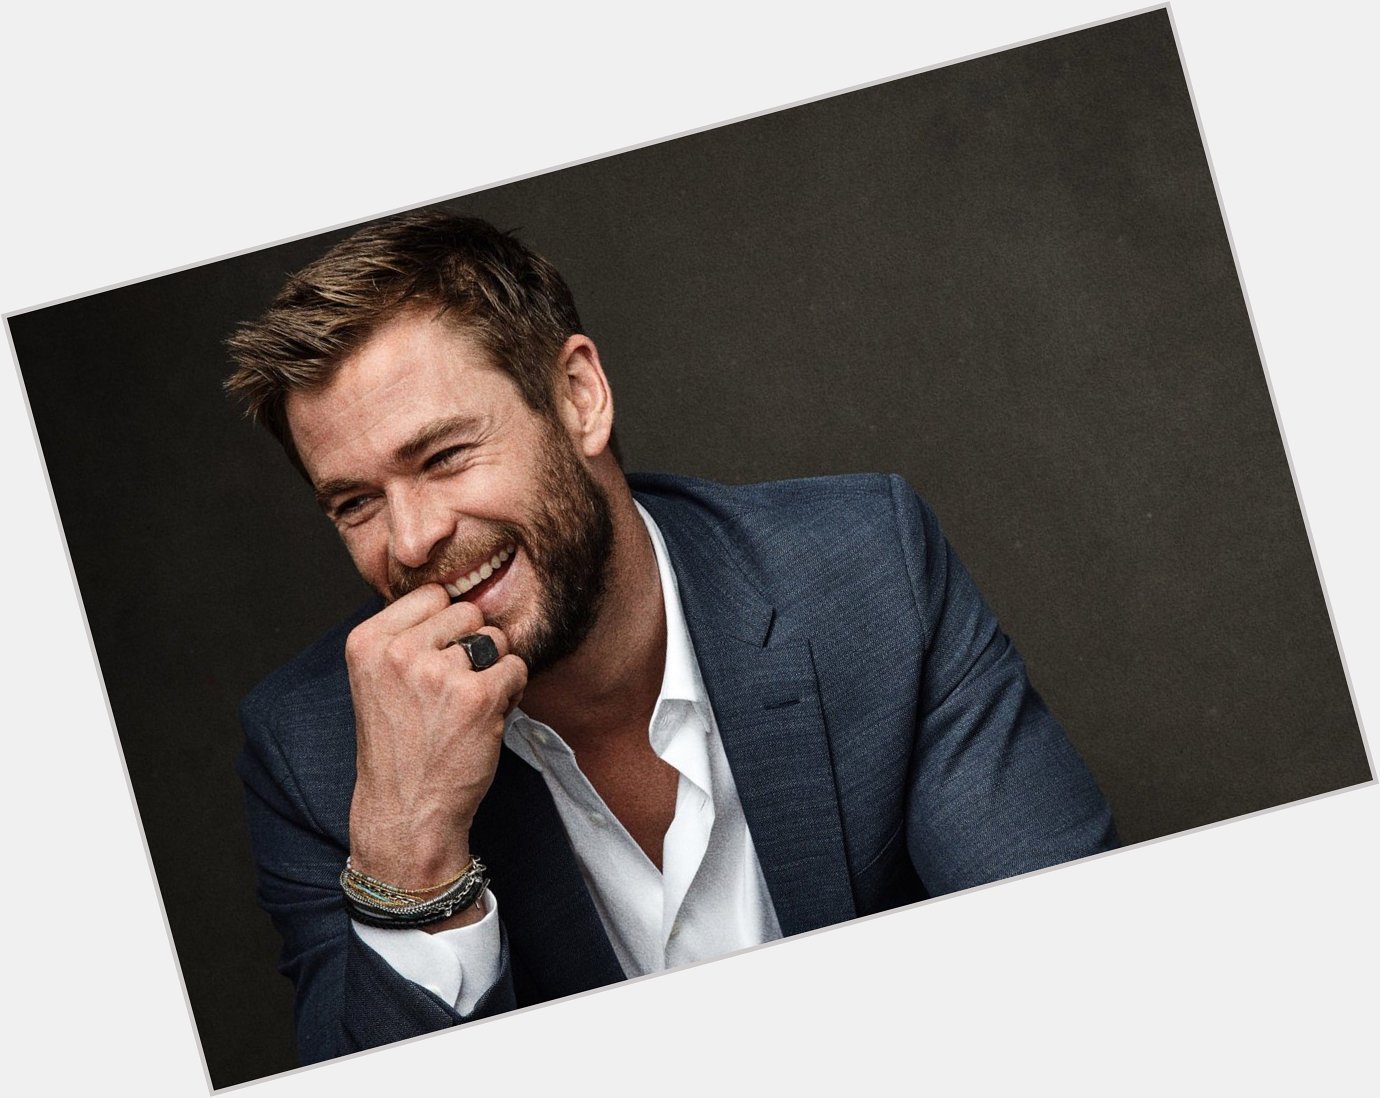 Happy birthday to the incredible, talented, sweet, caring and most beautiful person in the world CHRIS HEMSWORTH. 